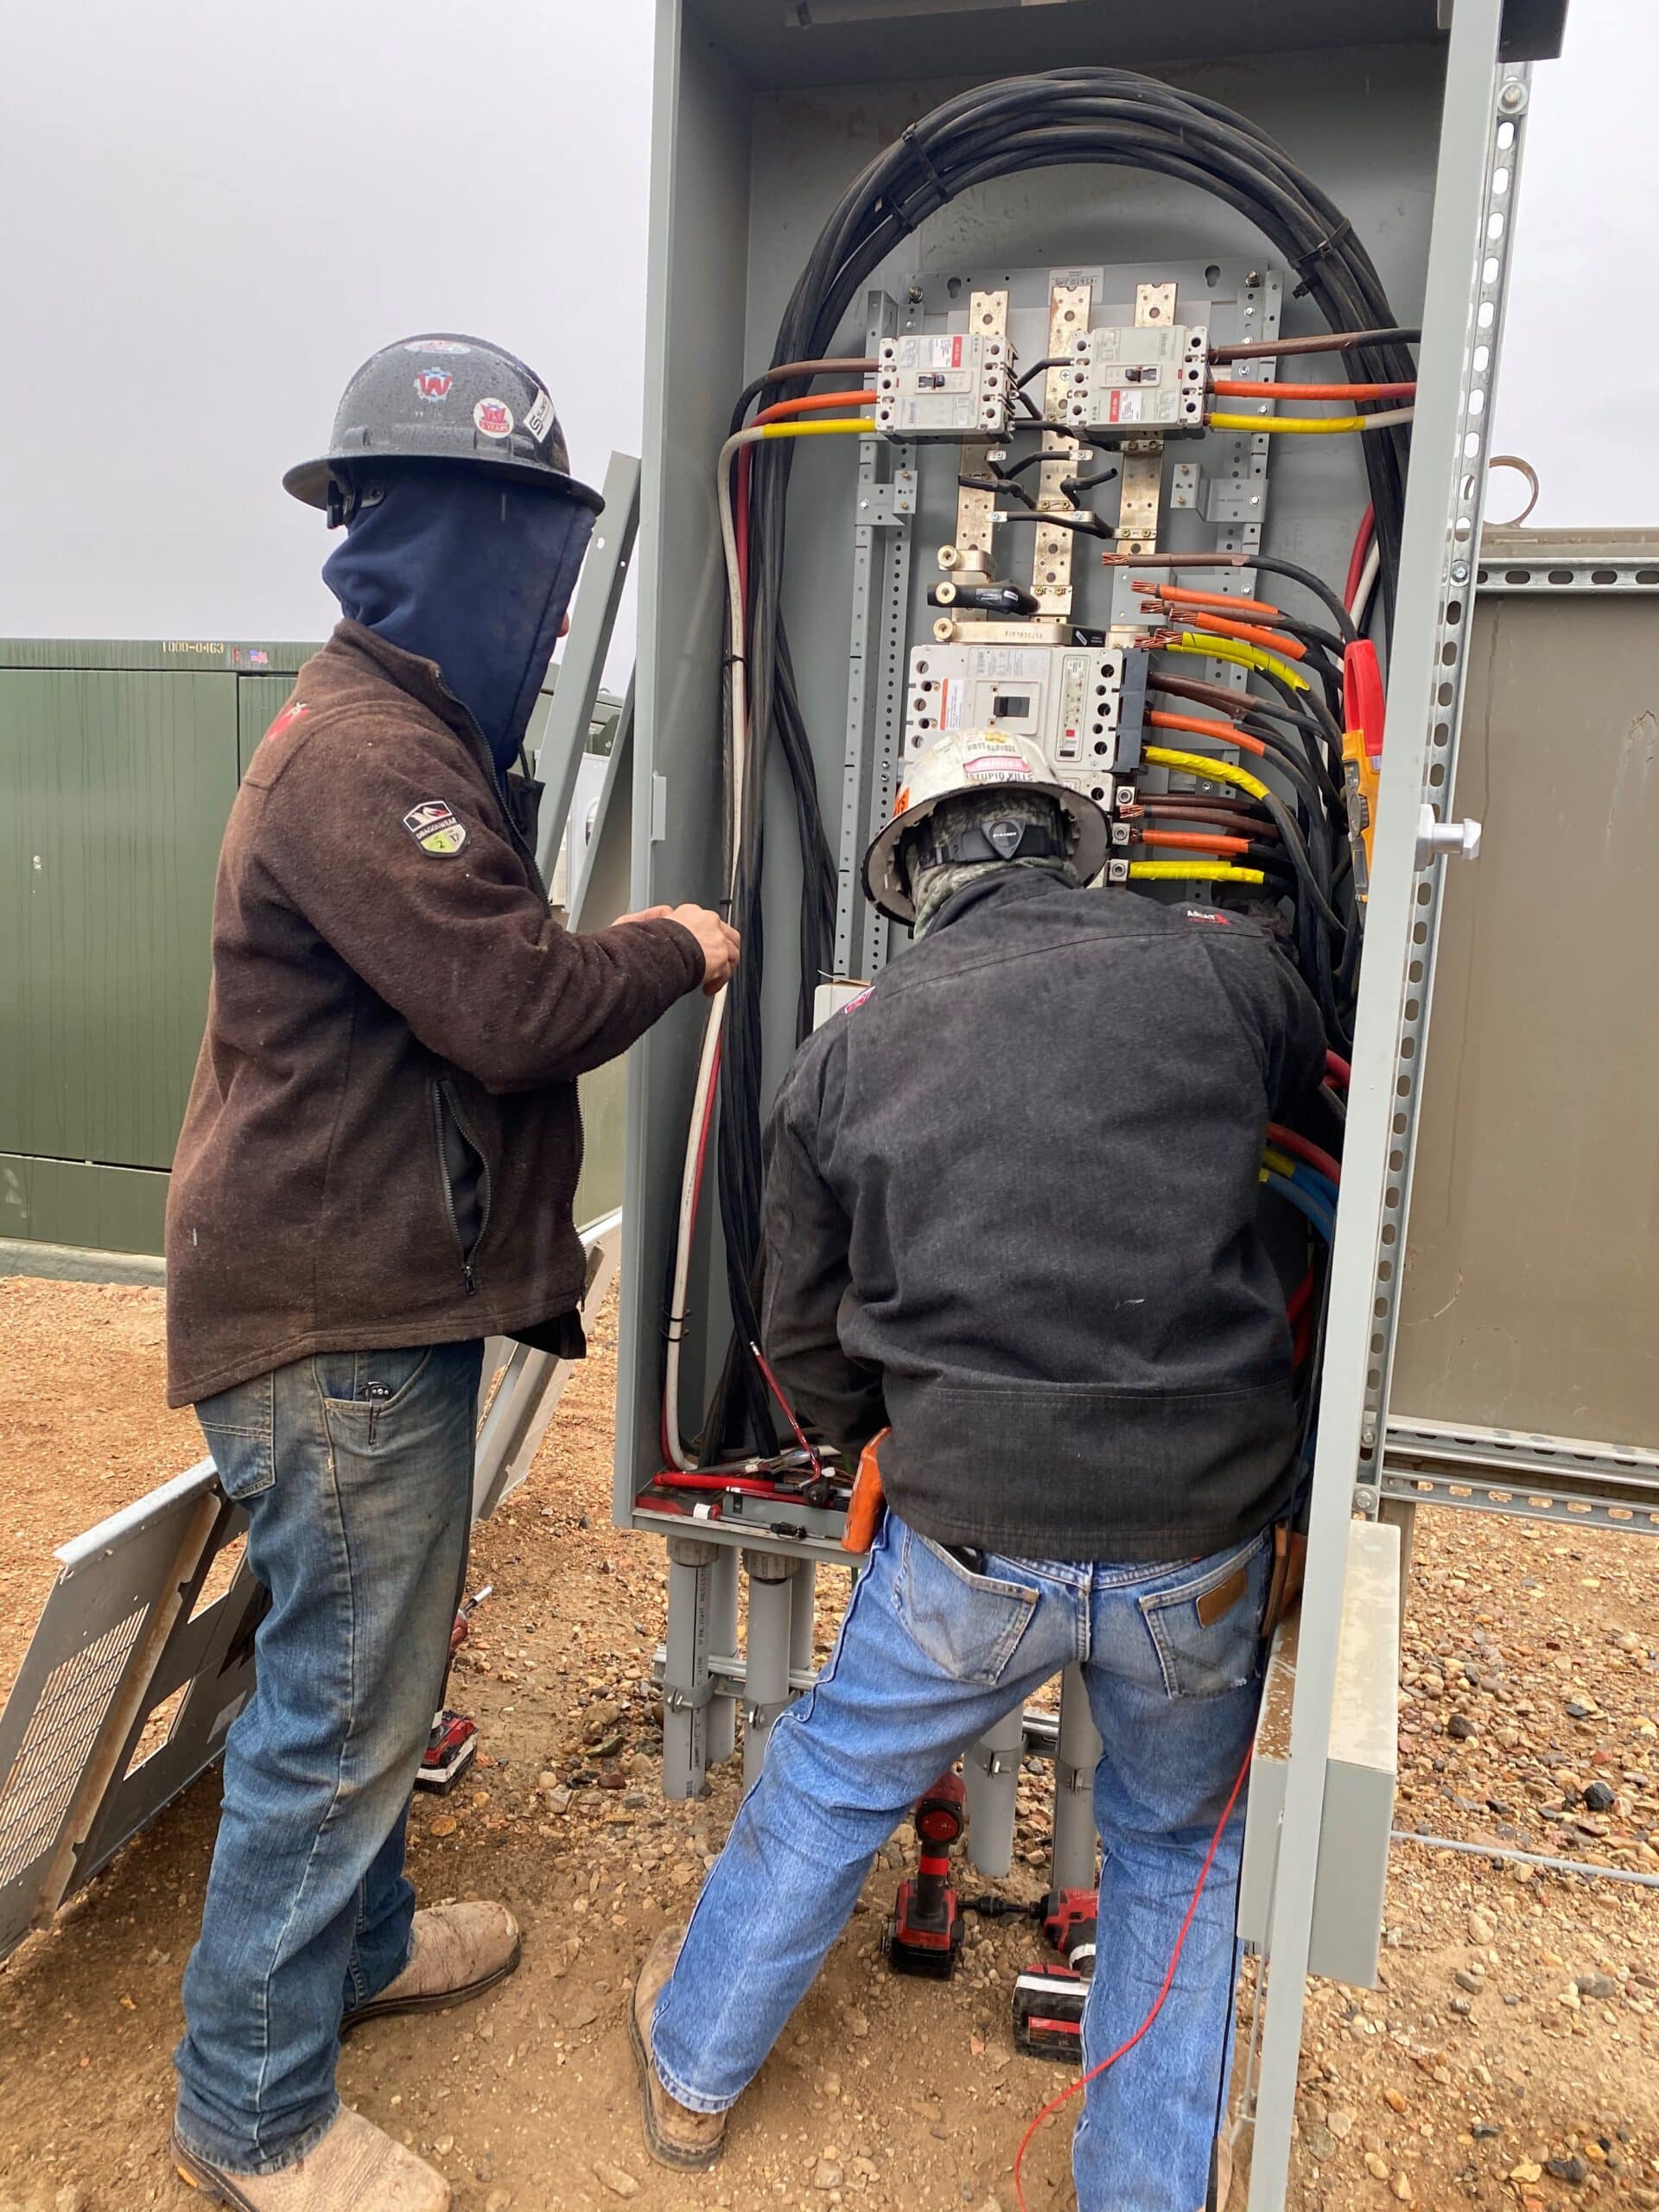 Two men hooking up an electrical panel